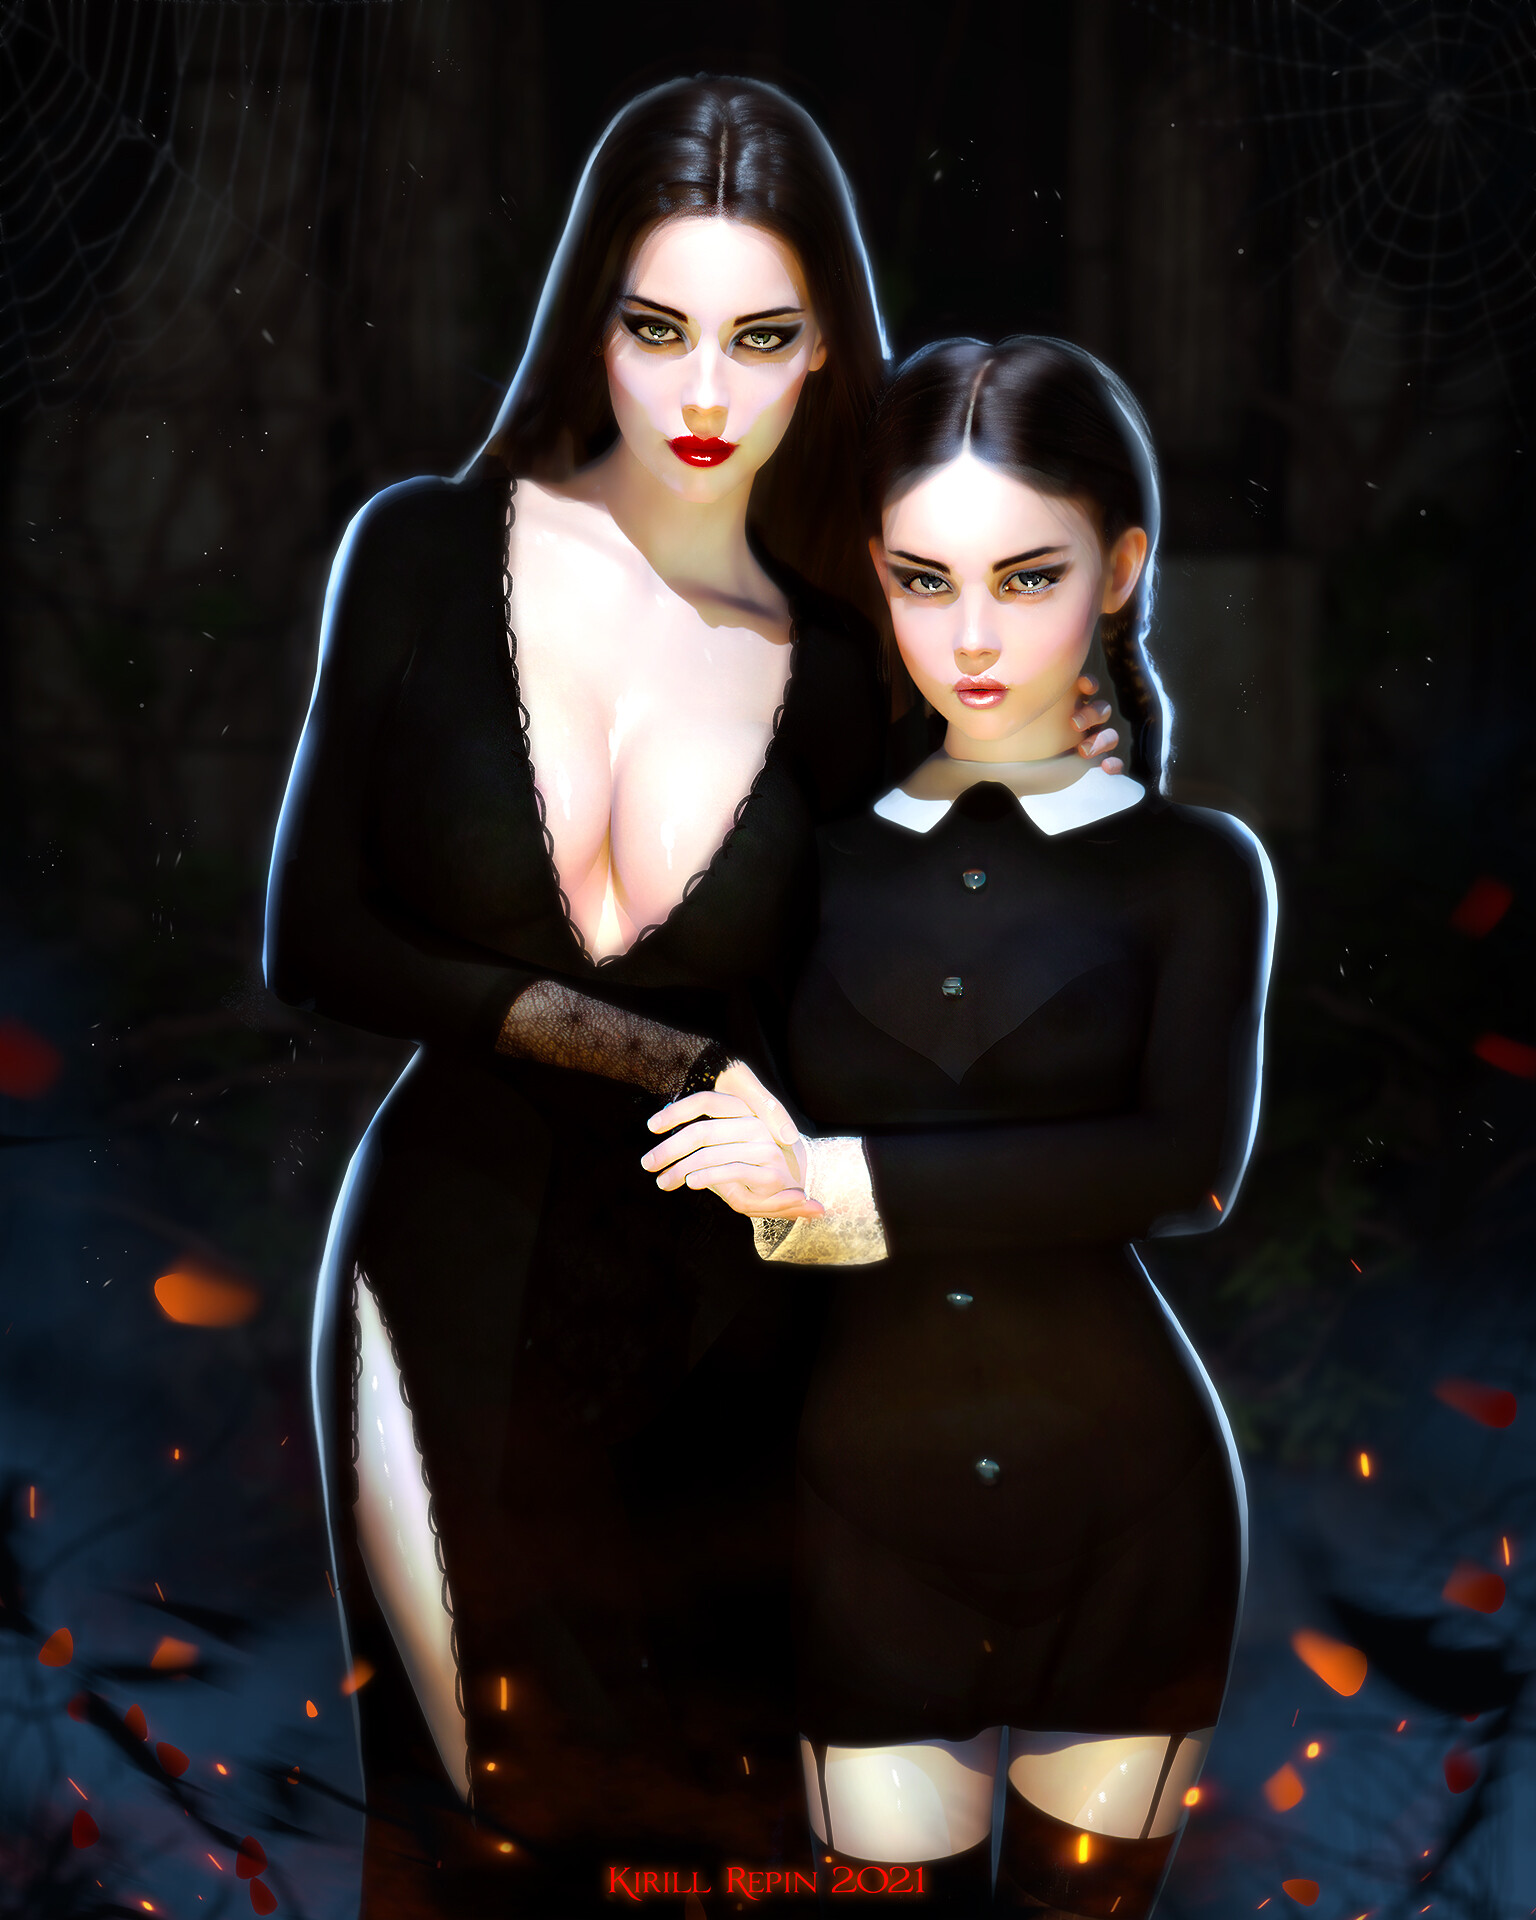 Morticia and Wednesday Addams are wishing you a happy Halloween 2021! 